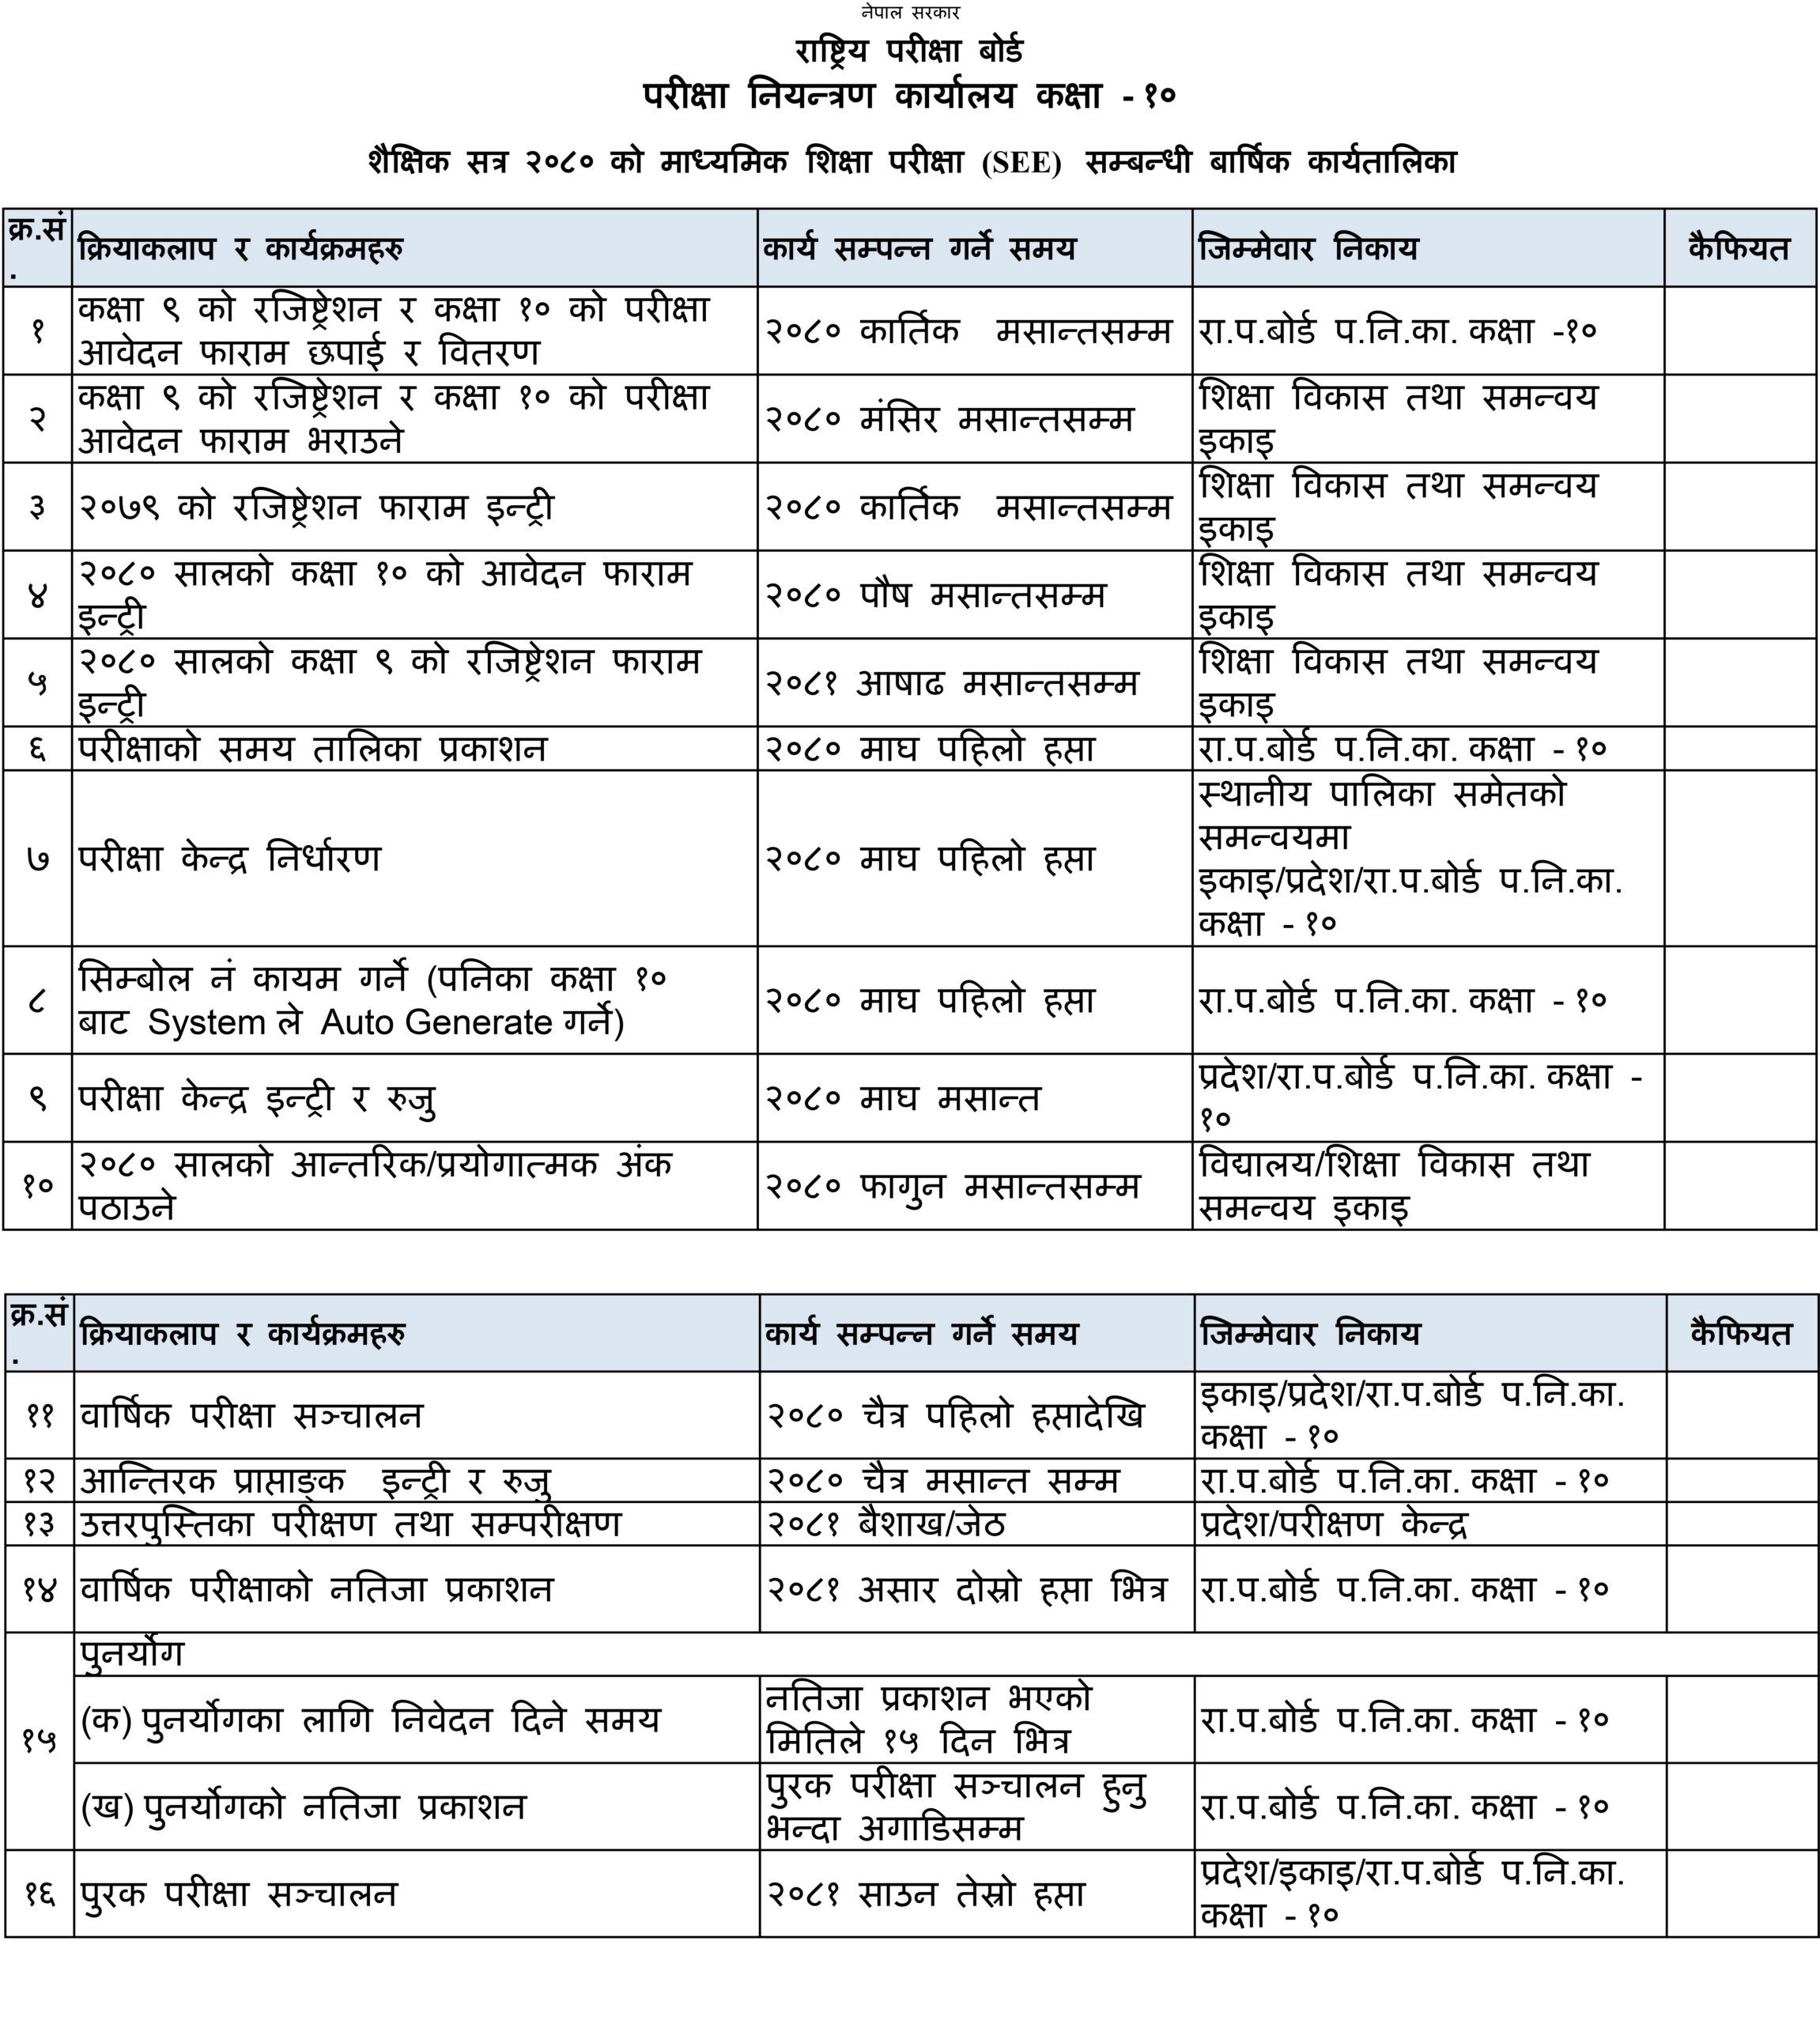 Annual Schedule for Secondary Education Examination (SEE) for Academic Session 2080